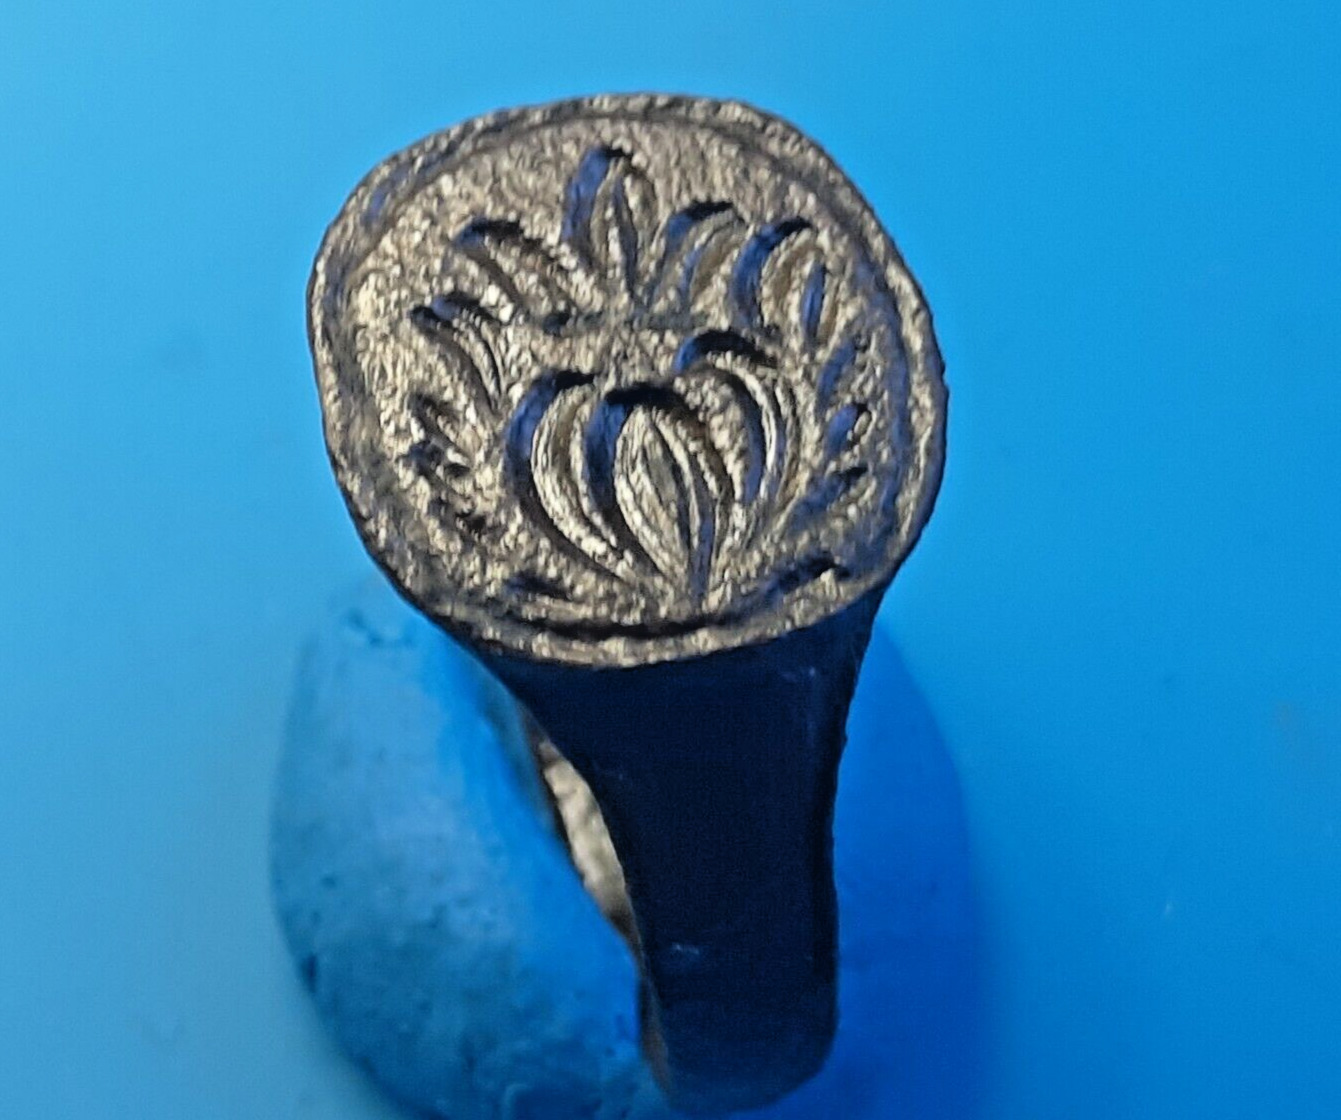 Original medieval ring with patterns.